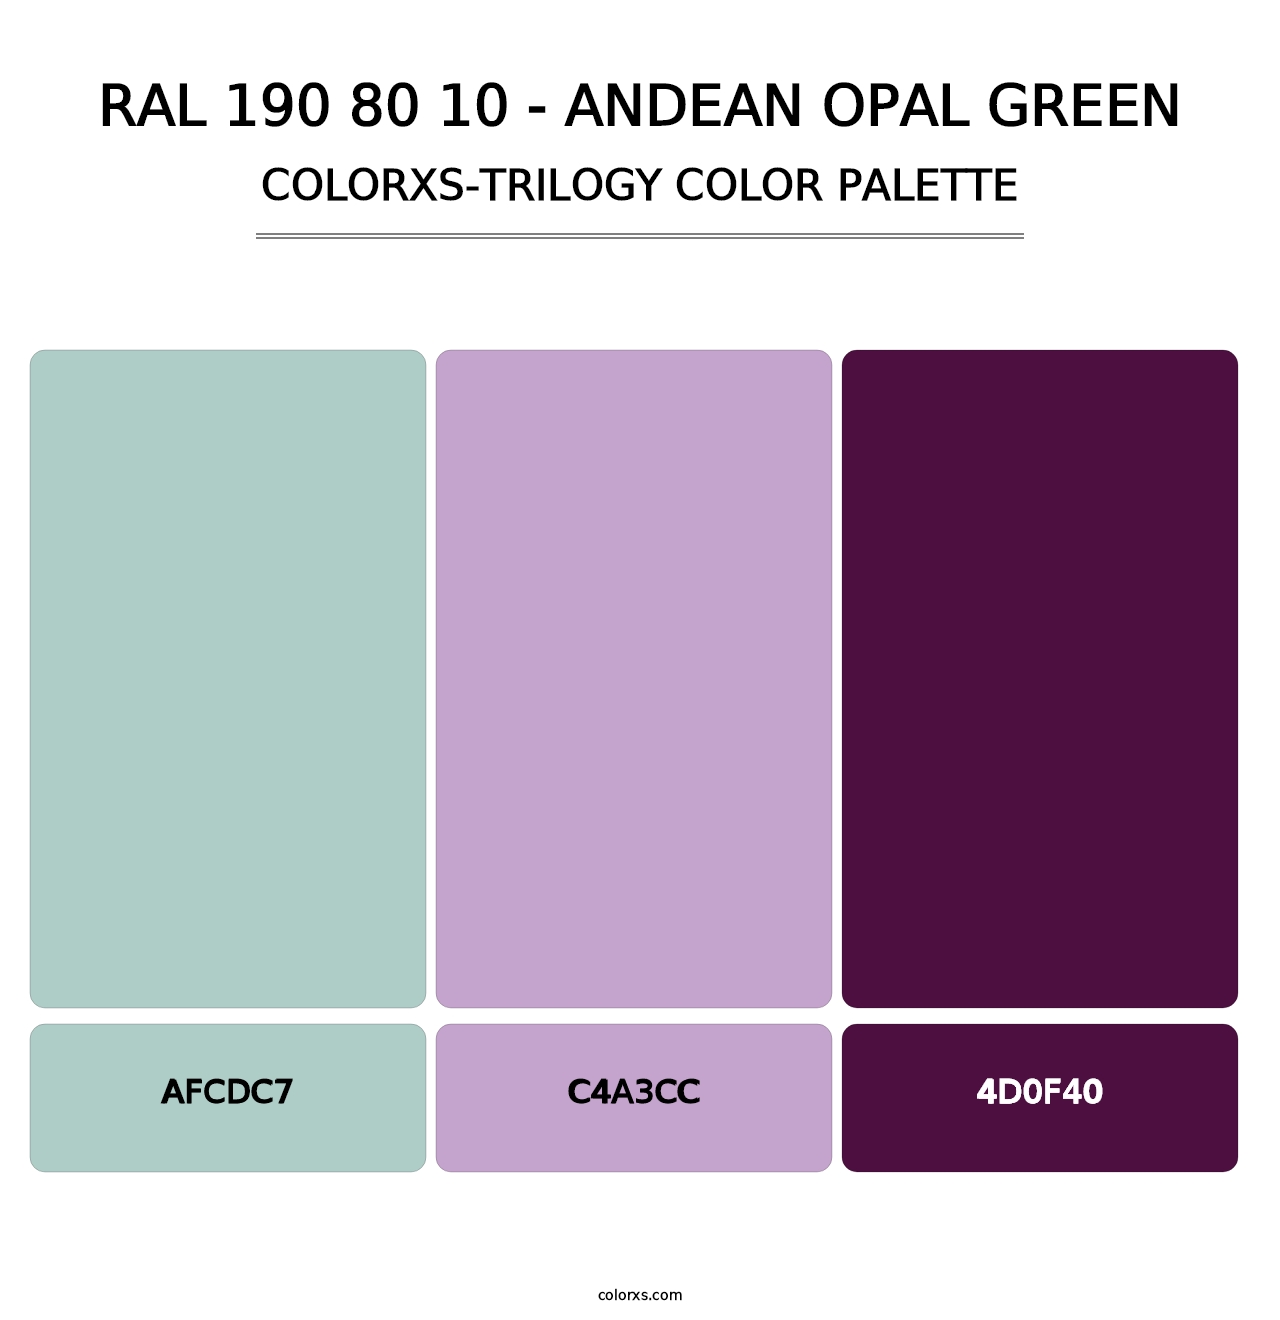 RAL 190 80 10 - Andean Opal Green - Colorxs Trilogy Palette